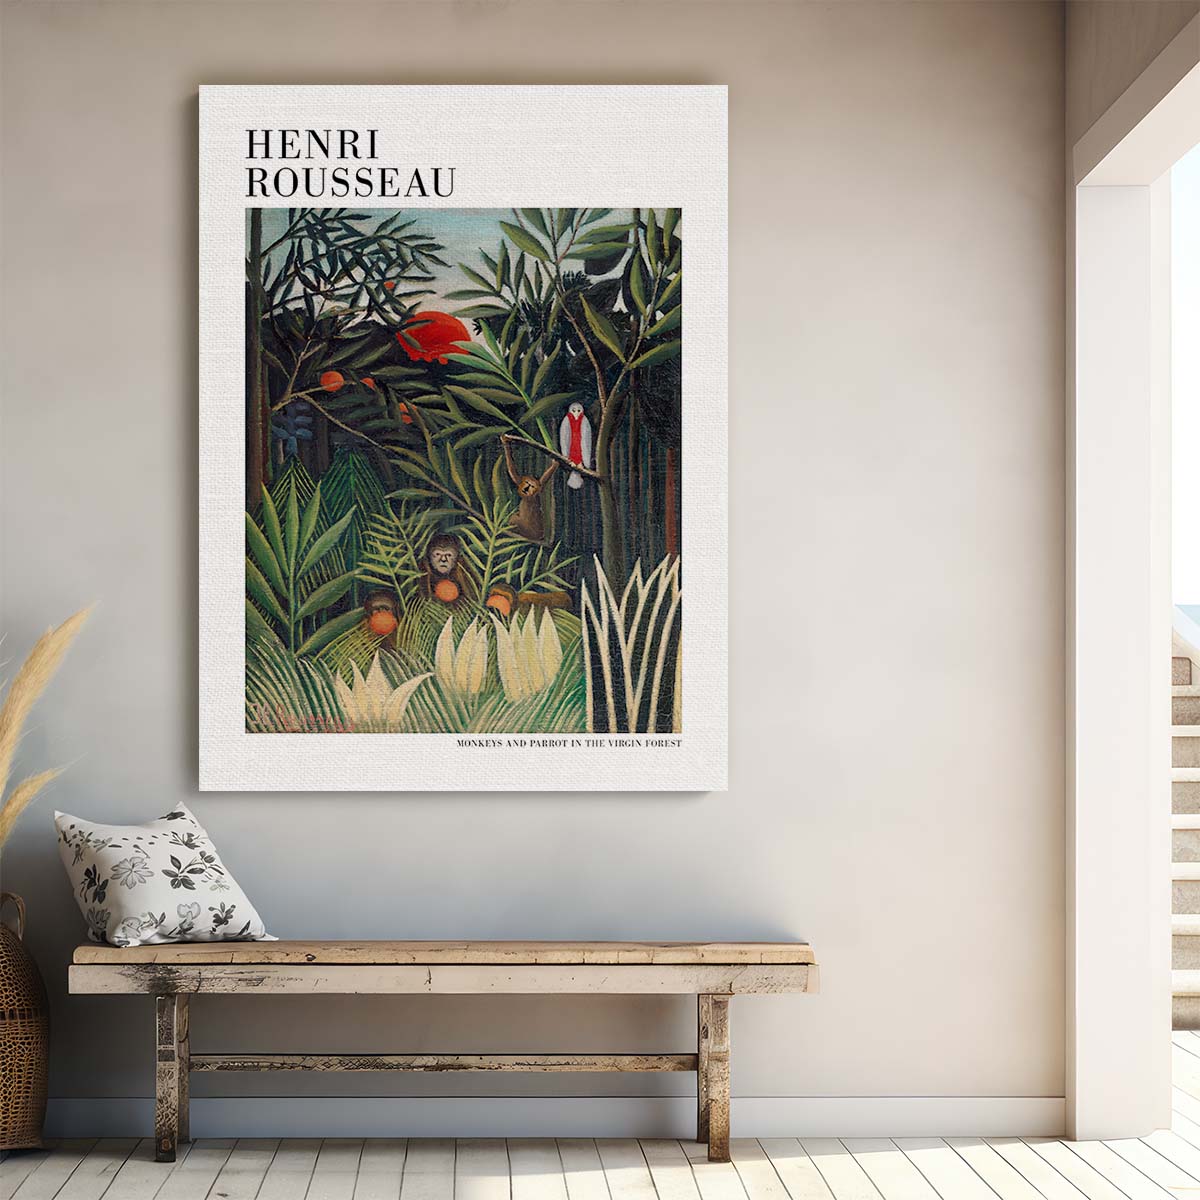 Rousseau's Illustrated Acrylic Painting of Monkeys and Parrot in Forest by Luxuriance Designs, made in USA